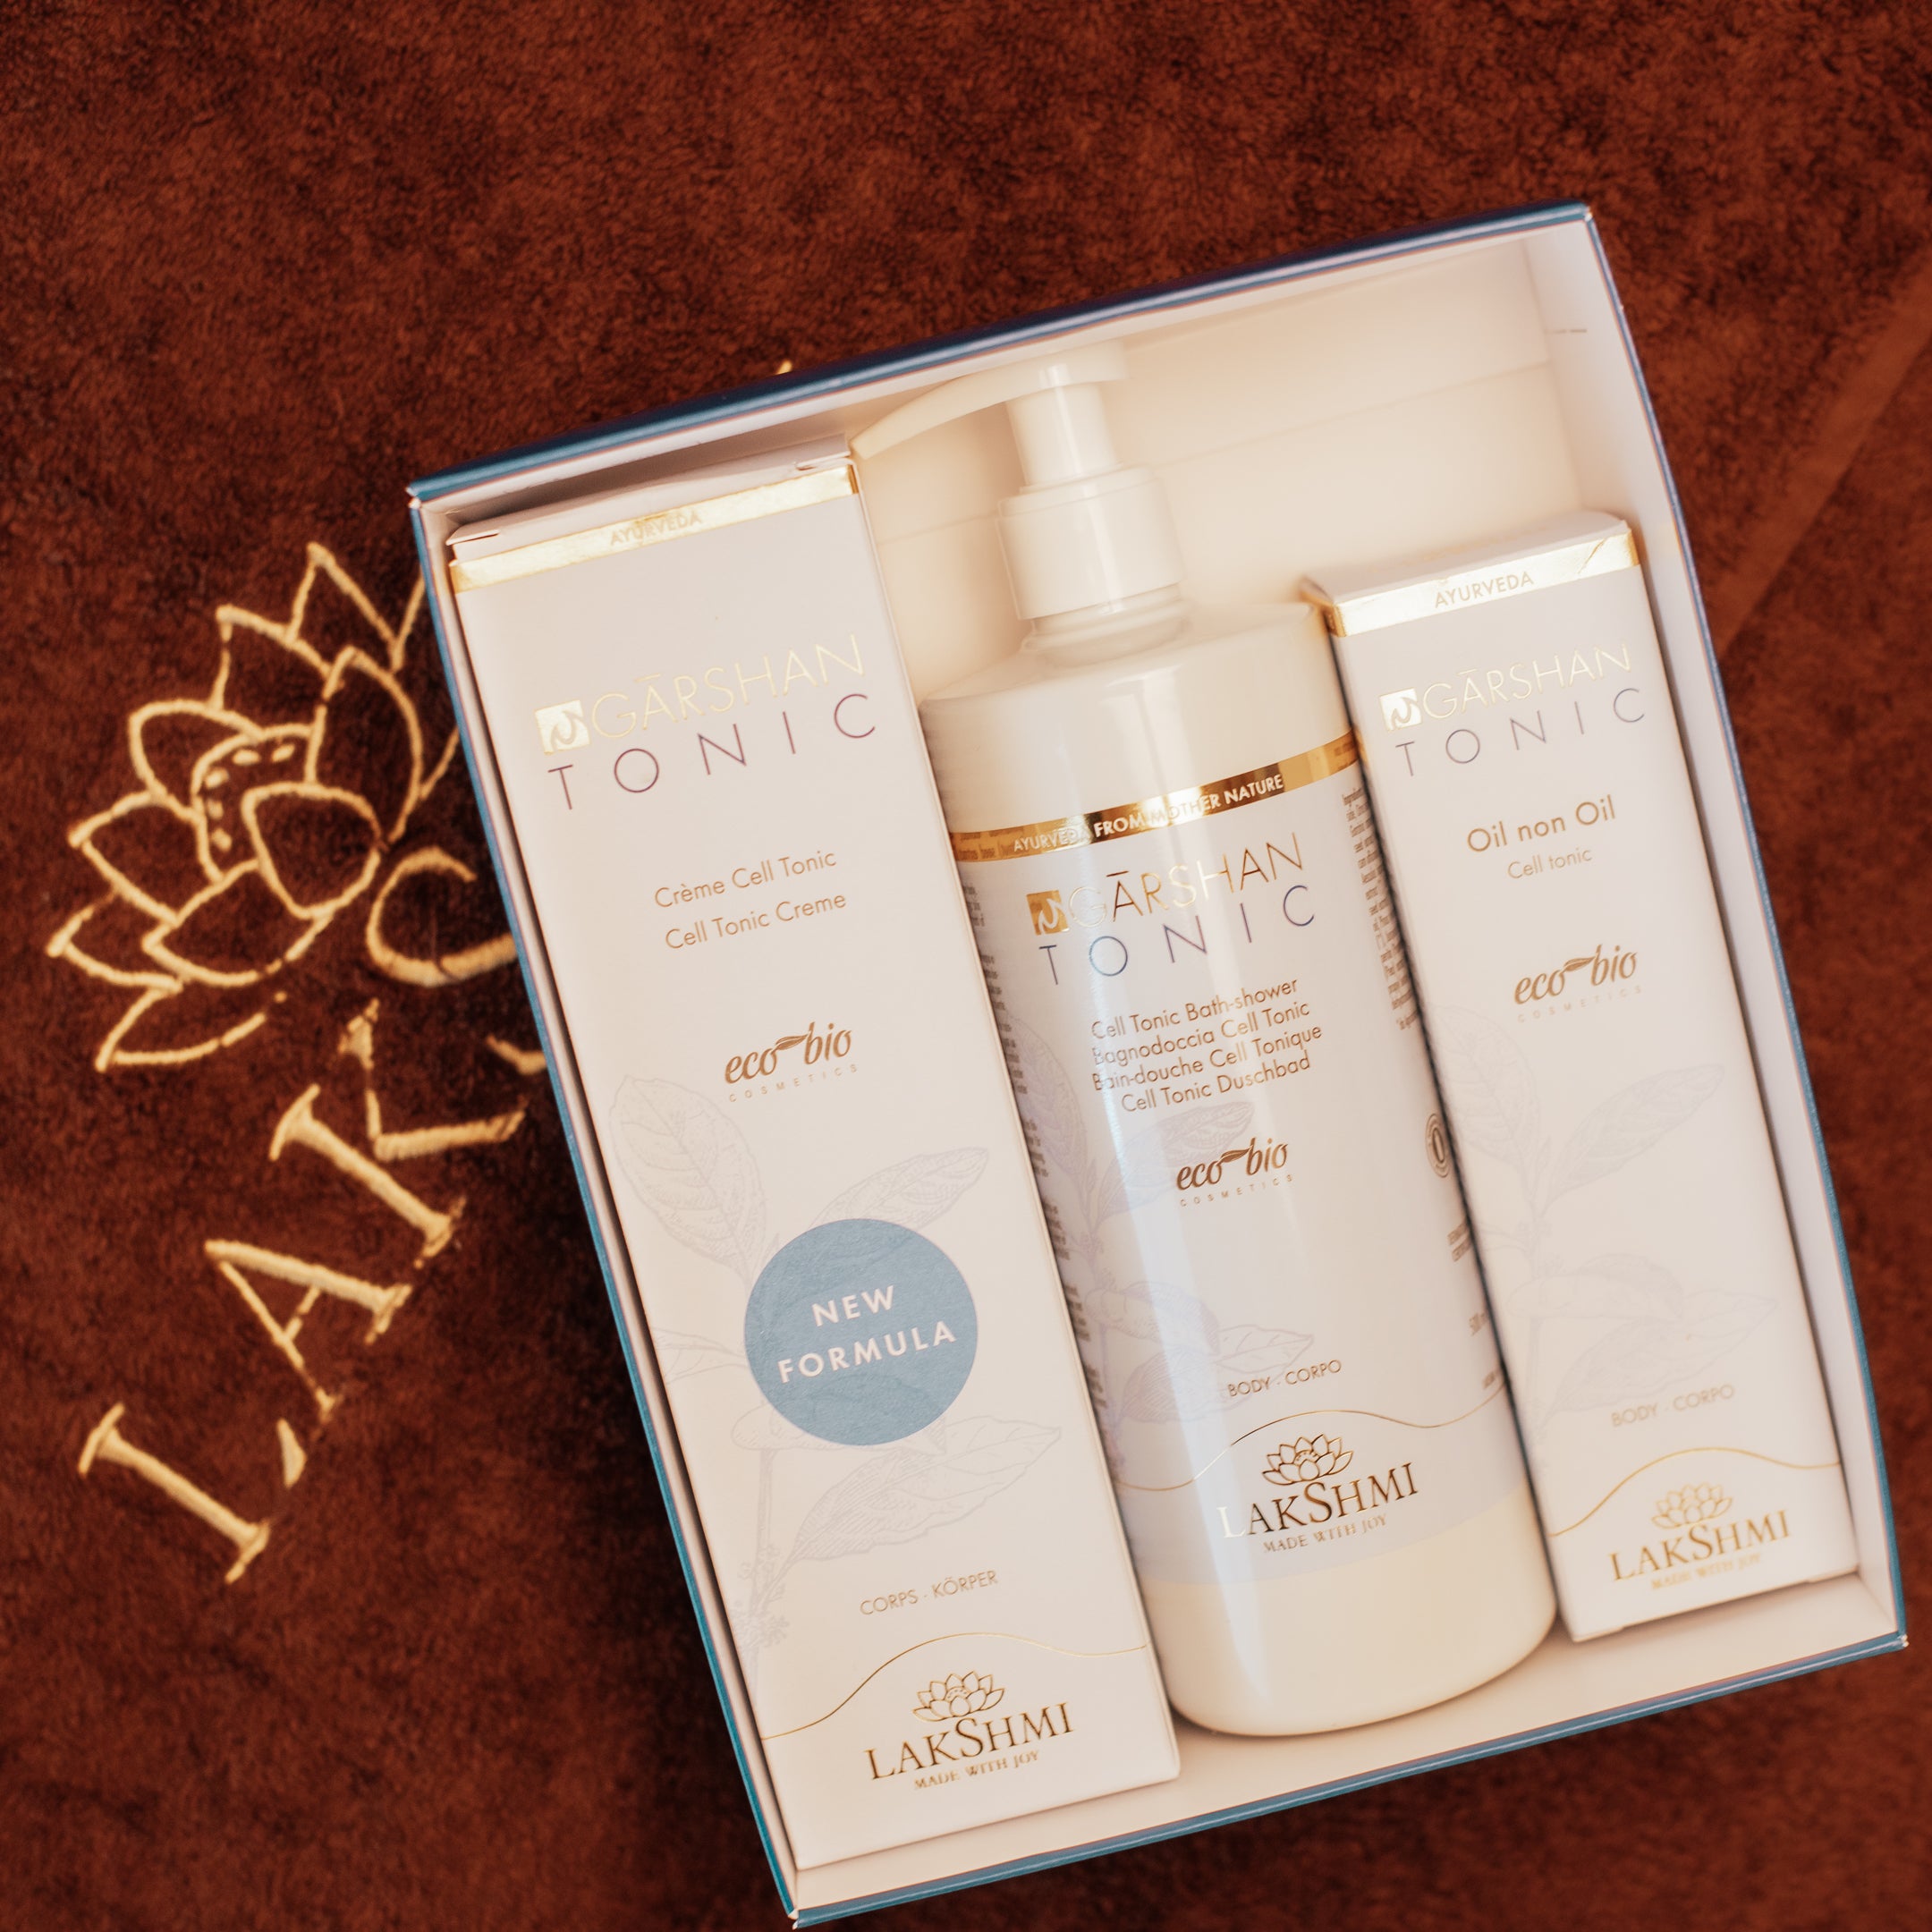 Garshan Tonic - Soft and Sclerotic Cellulite Ritual